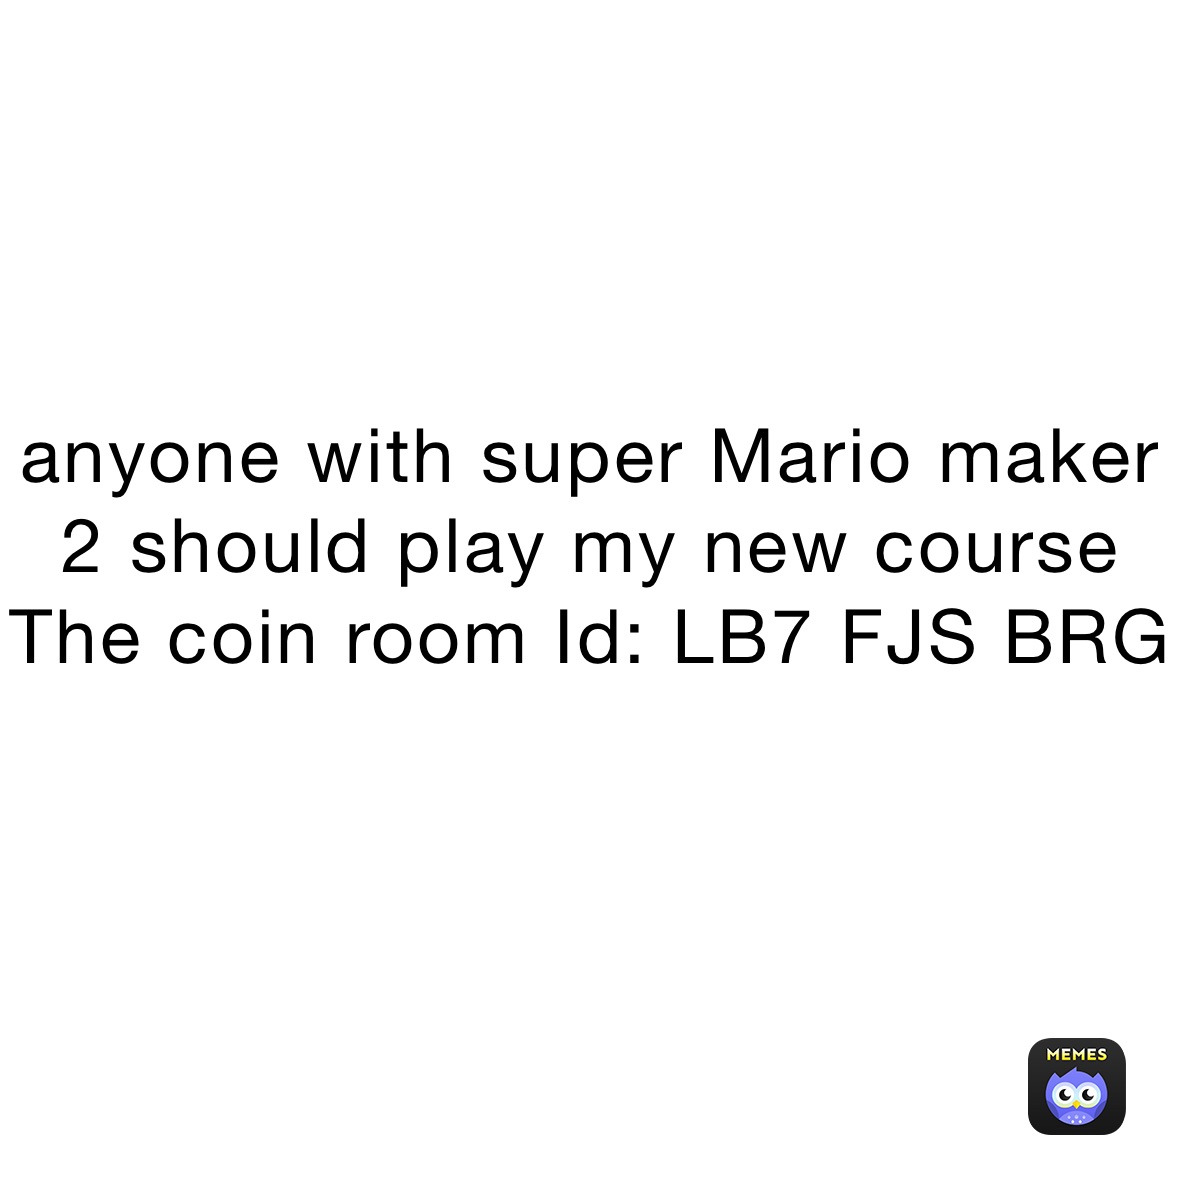 anyone with super Mario maker 2 should play my new course The coin room Id: LB7 FJS BRG
